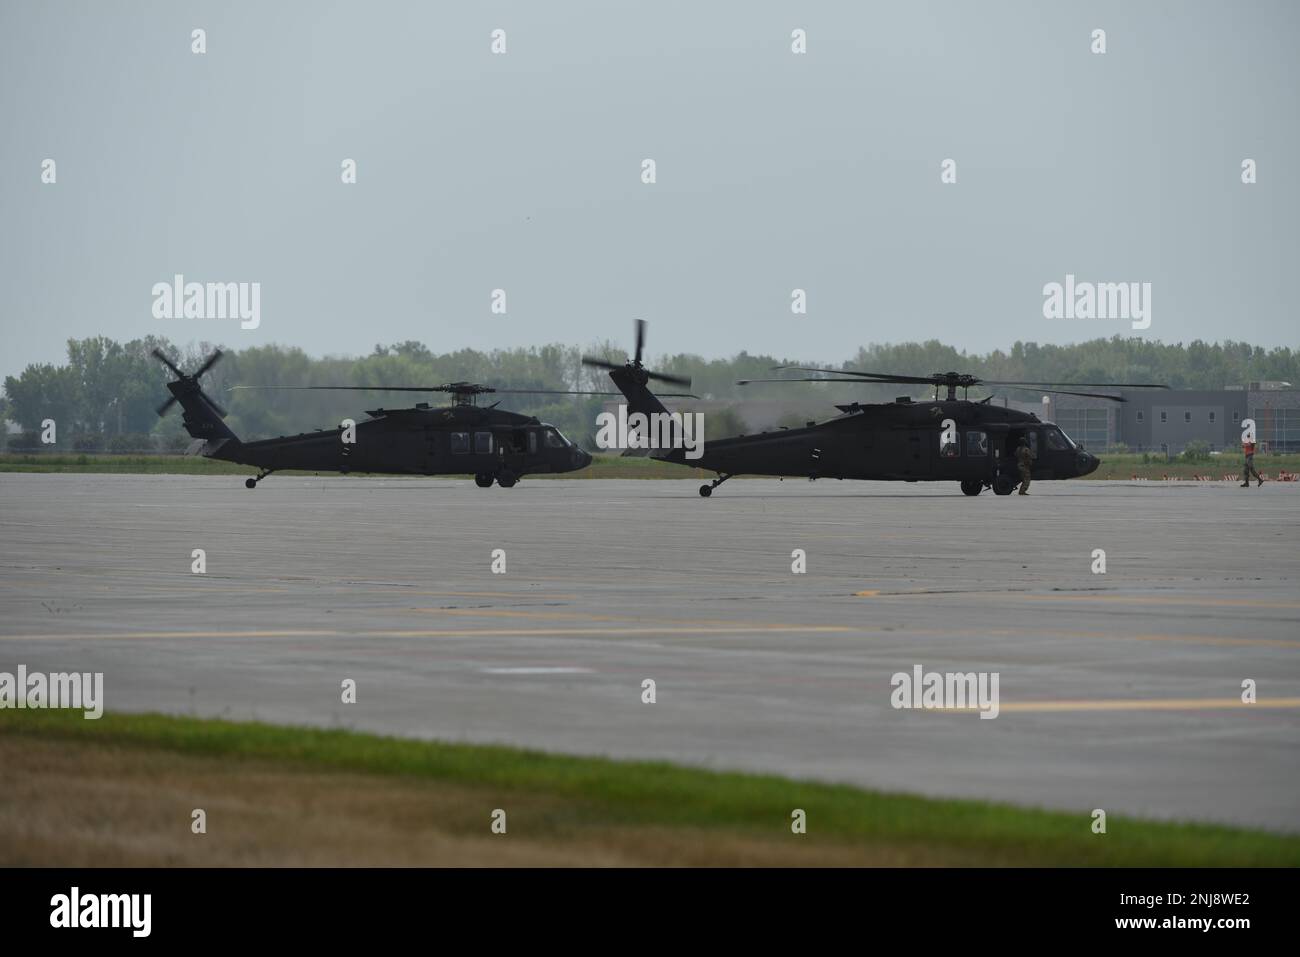 U.S. Army National Guard UH-60 Blackhawks park on the flight line at the 185th Air Refueling Wing at Sioux City, Iowa, August 6, 2022. The Blackhawks transported distinguished guests, including Maj. Gen. Benjamin J. Correll, Adjutant General of the Iowa National Guard, of the Iowa Army and Air National Guard to the 185th ARW for the unit’s Change of Command ceremony. Stock Photo